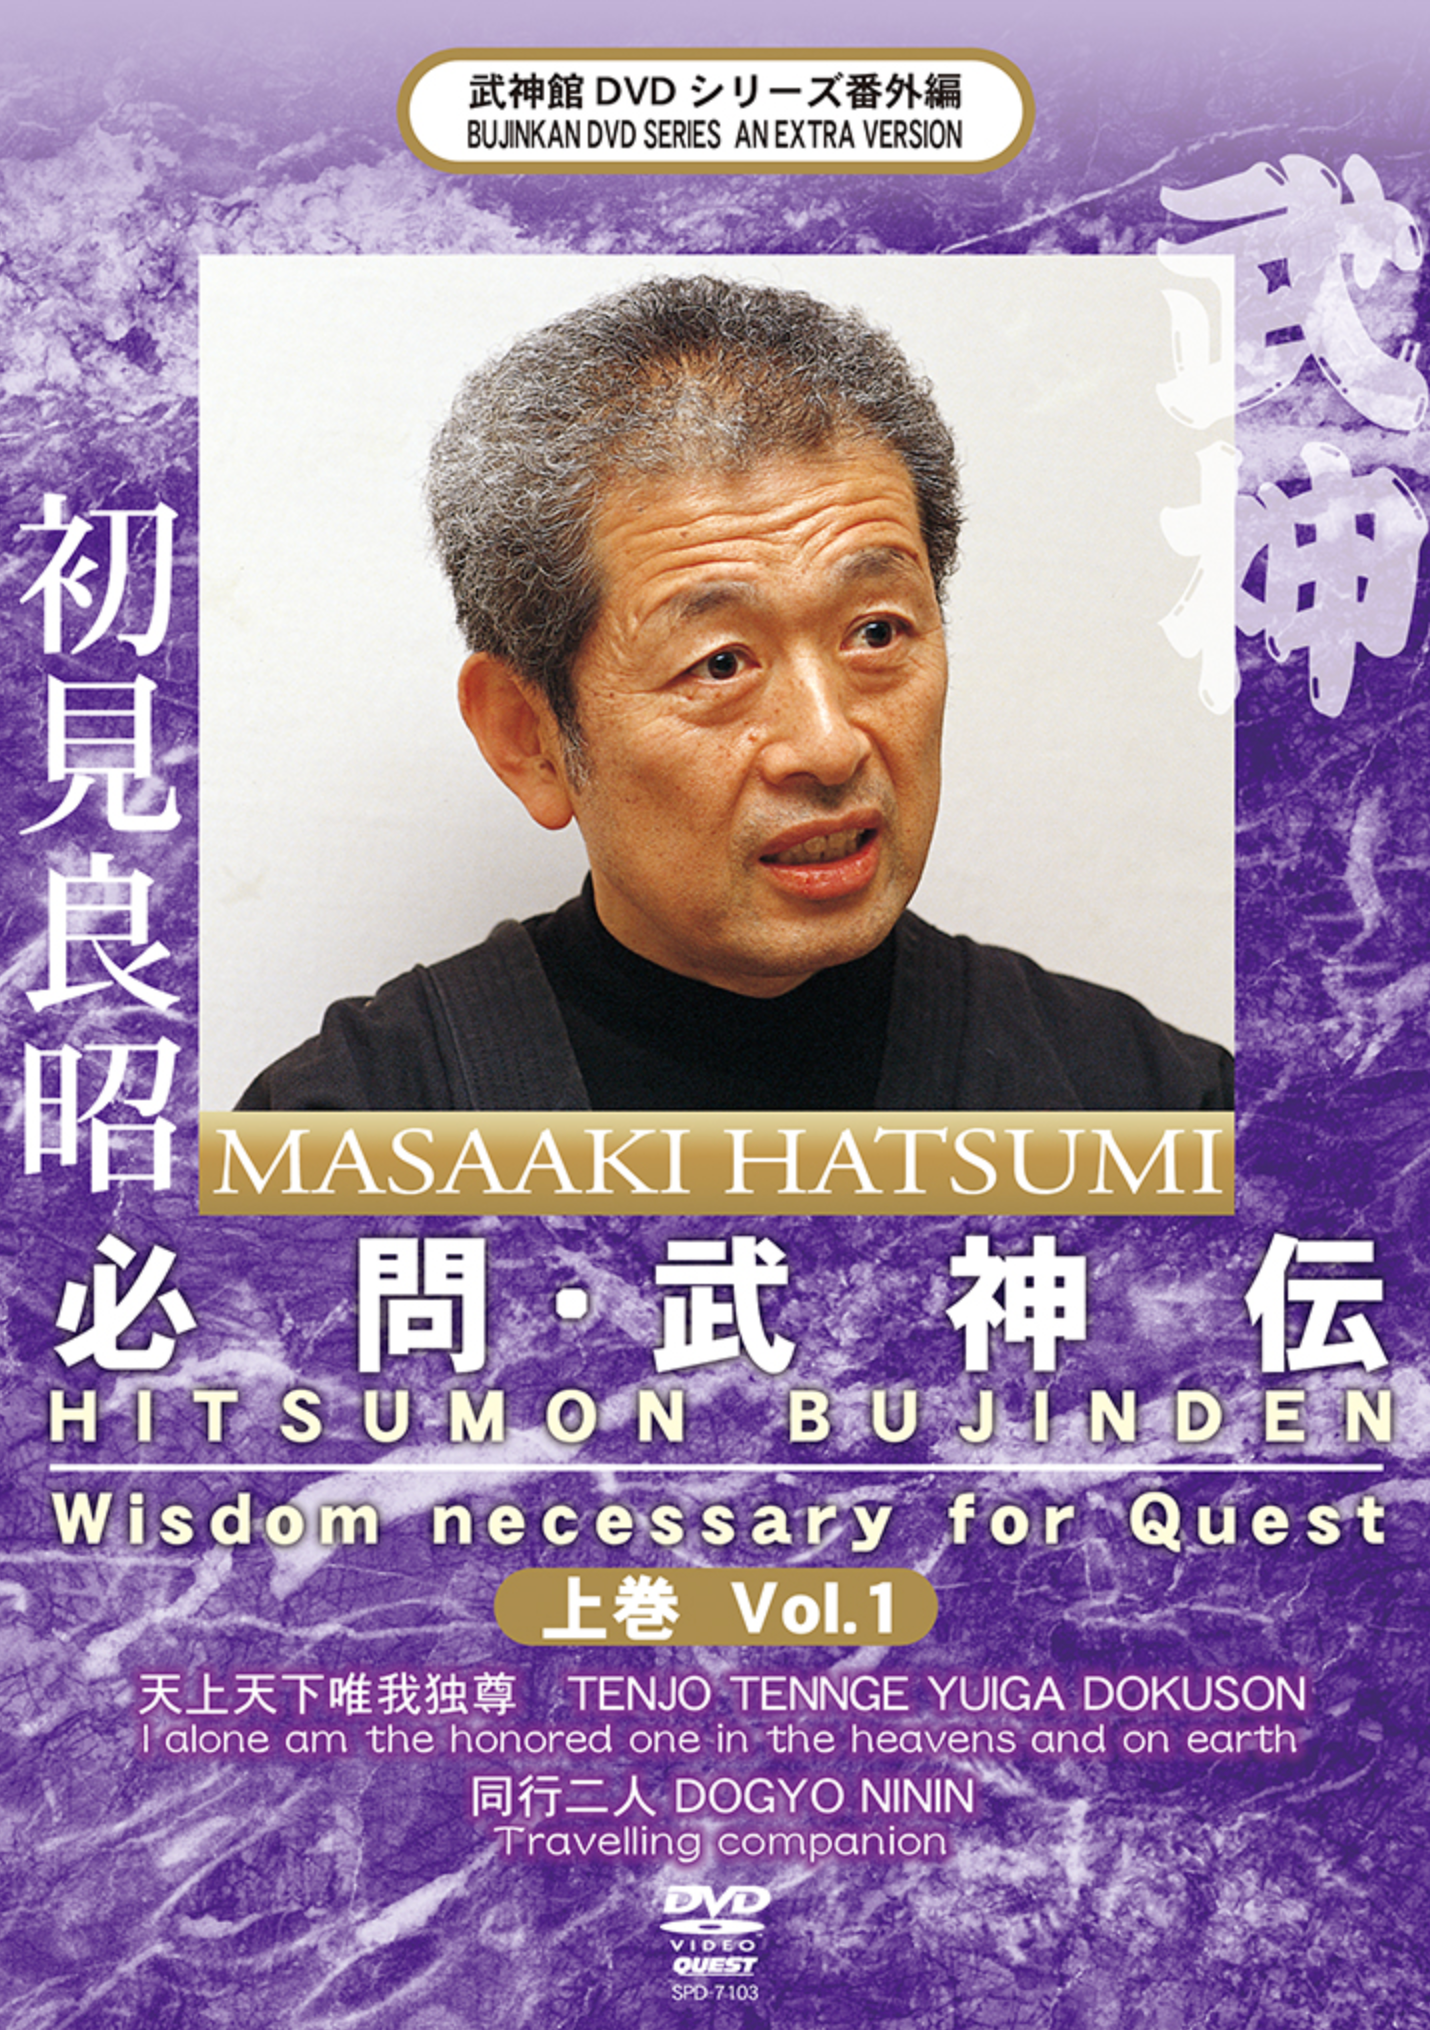 Hitsumon Bujinden Vol 1: Wisdom Necessary for Quest DVD with Masaaki Hatsumi - Budovideos Inc